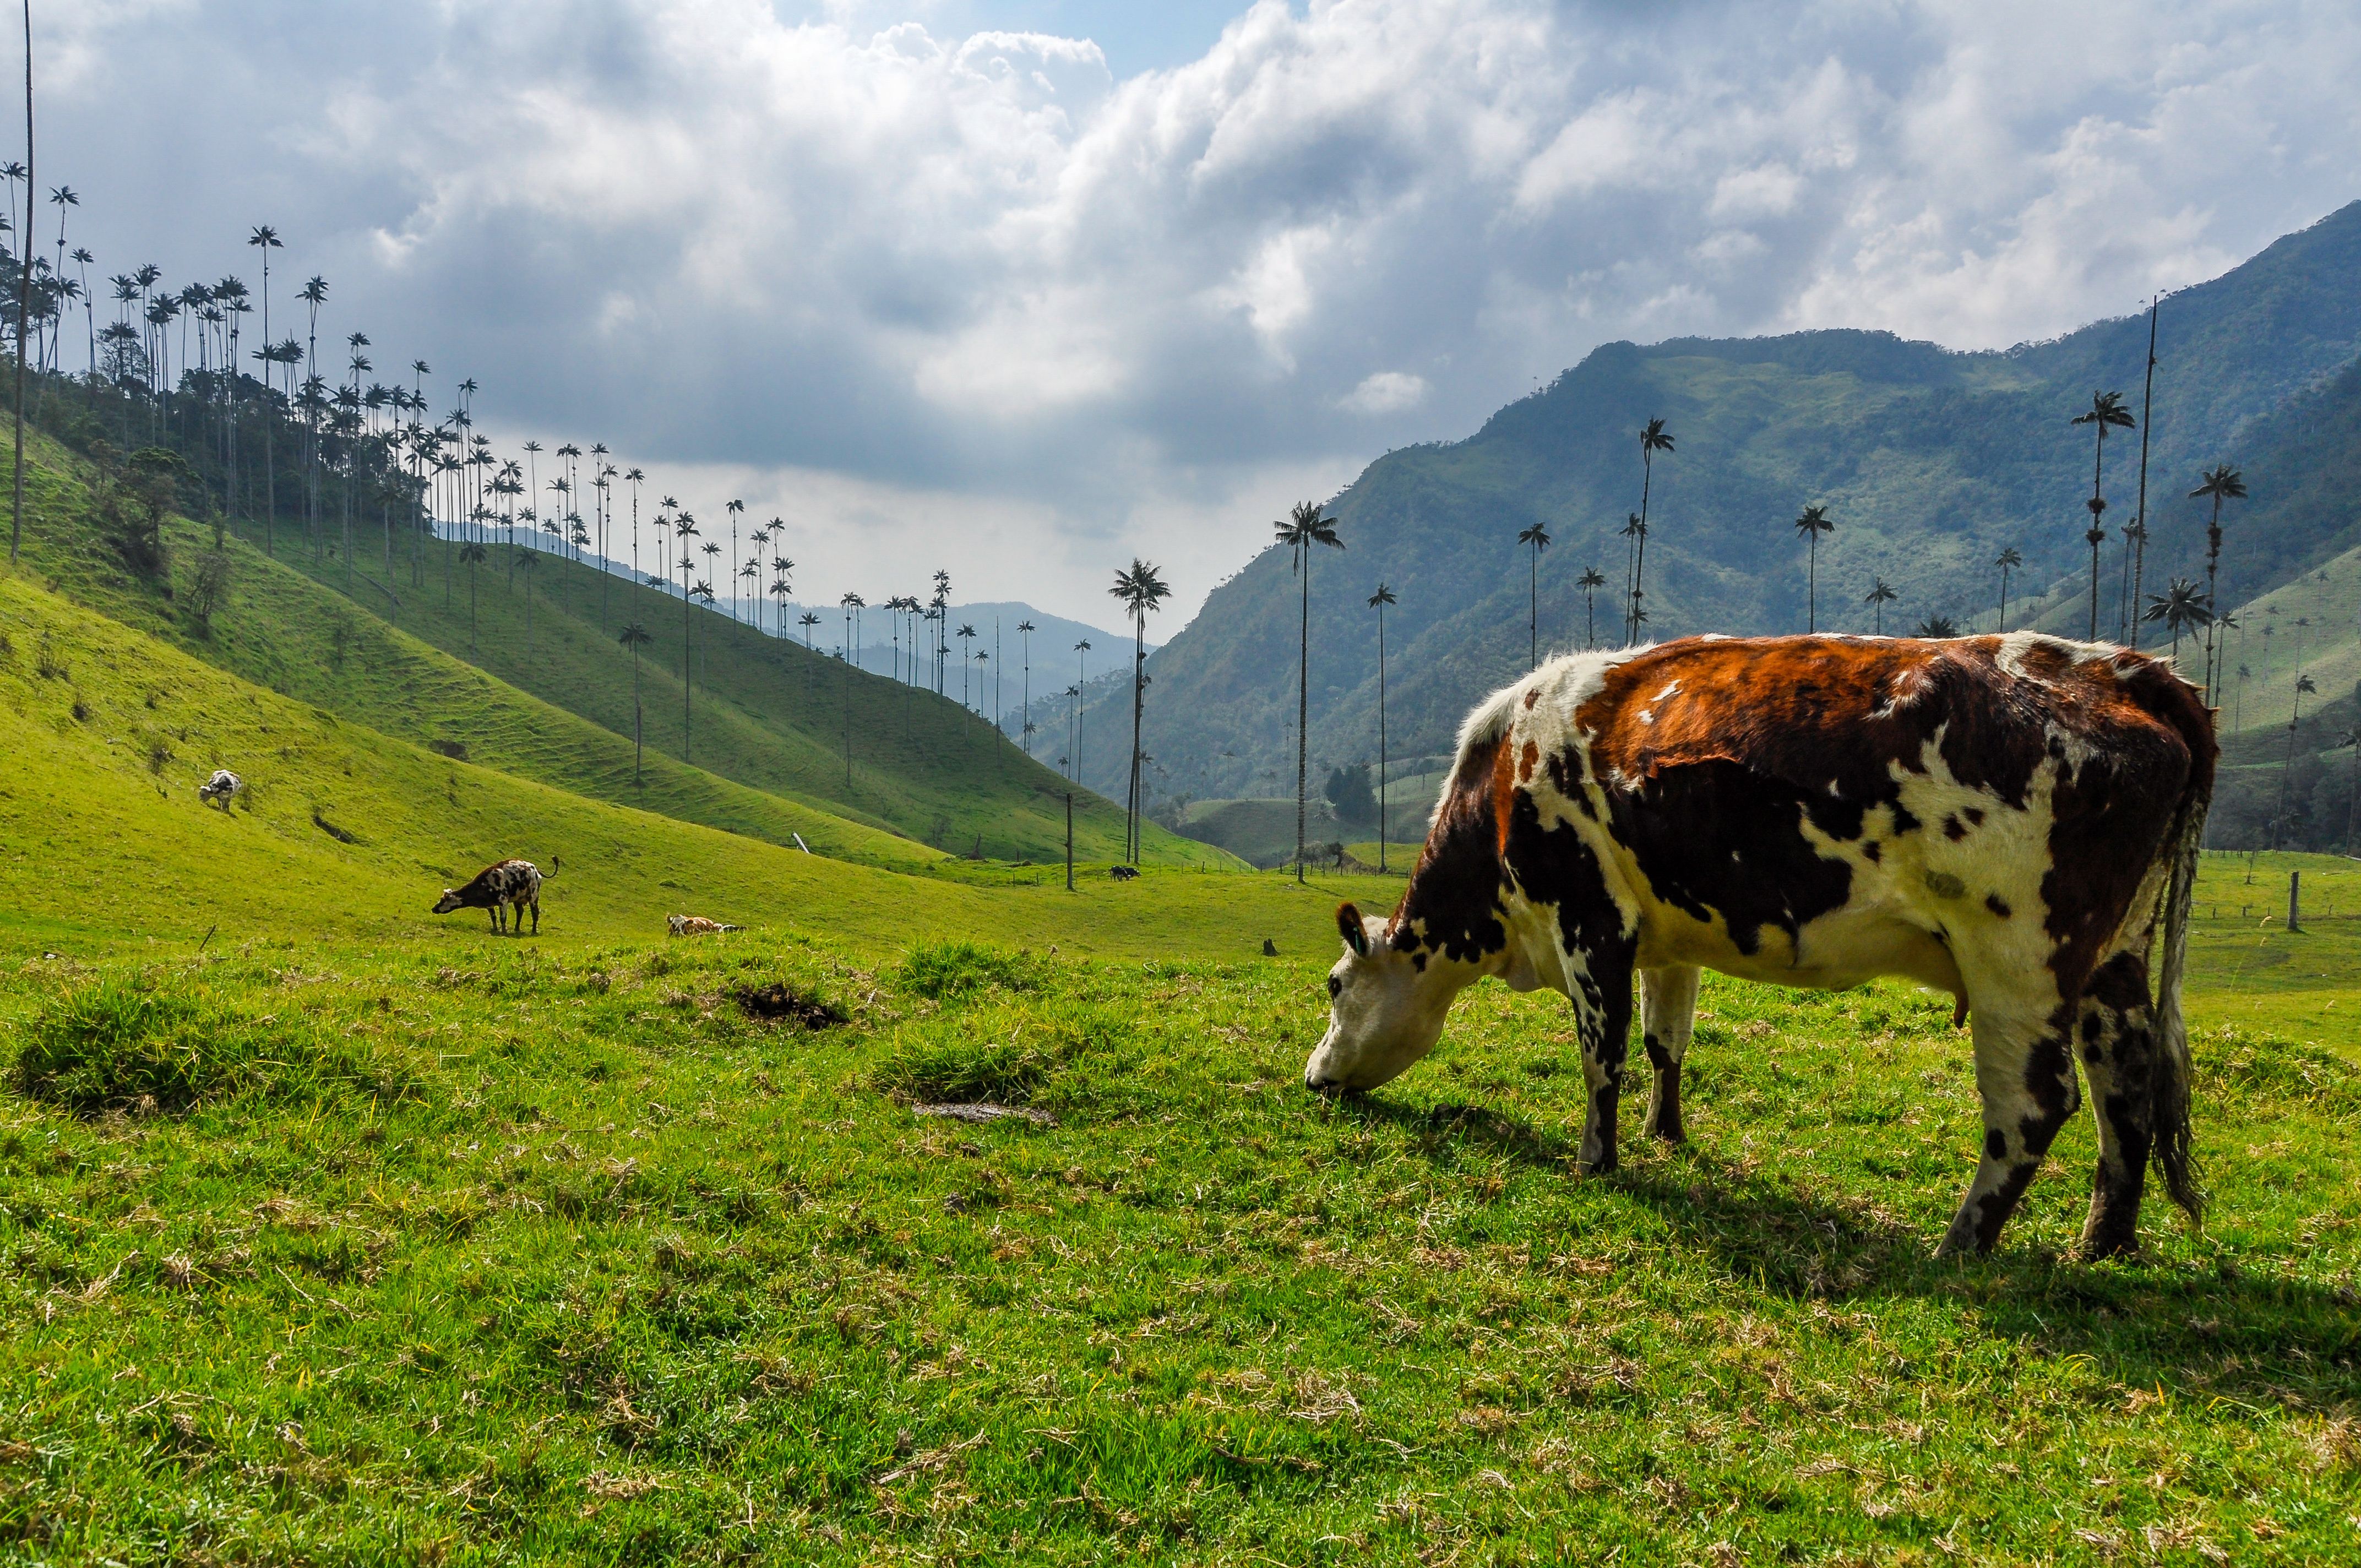 A cow grazes with palm trees and mountains in the backdrop in Cocora Valley, Colombia.